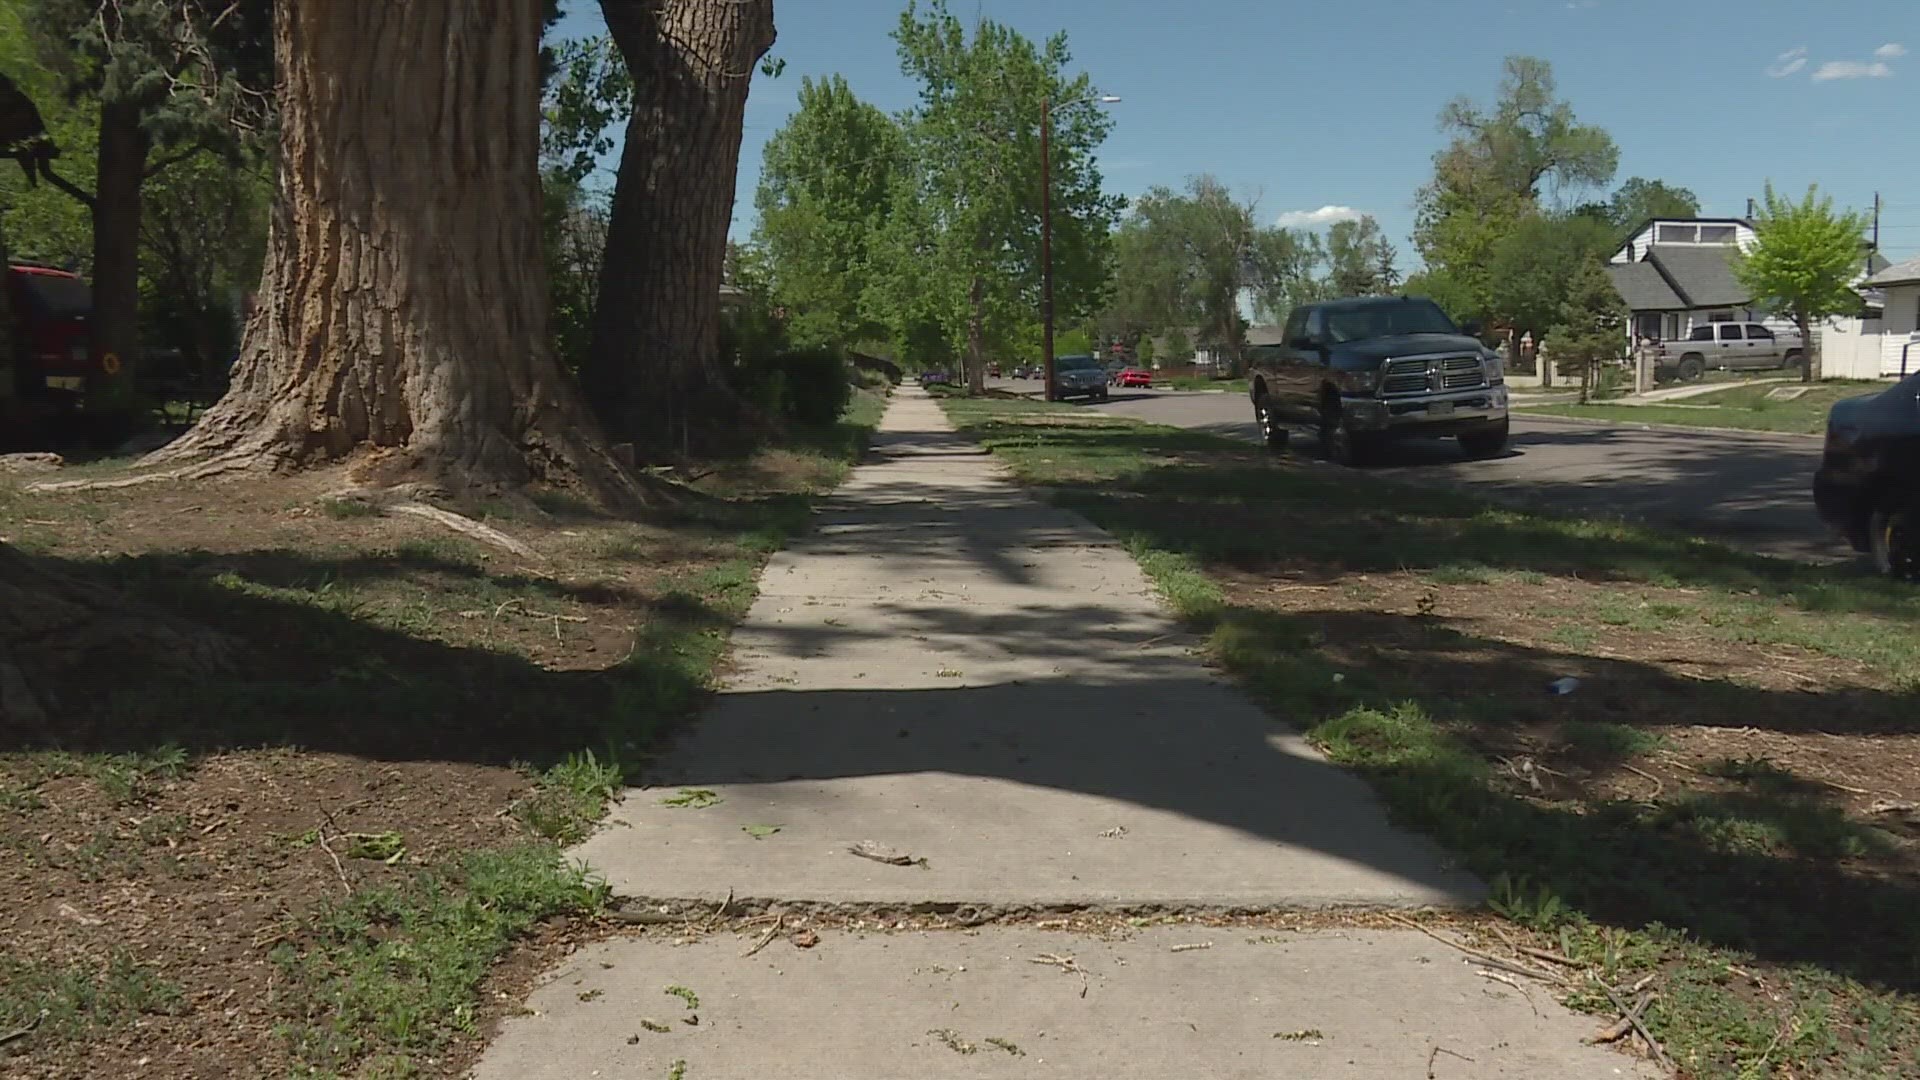 Denver will wait six more months before starting to charge a fee to homeowners to improve sidewalks. The fee is now set to start on July 1.